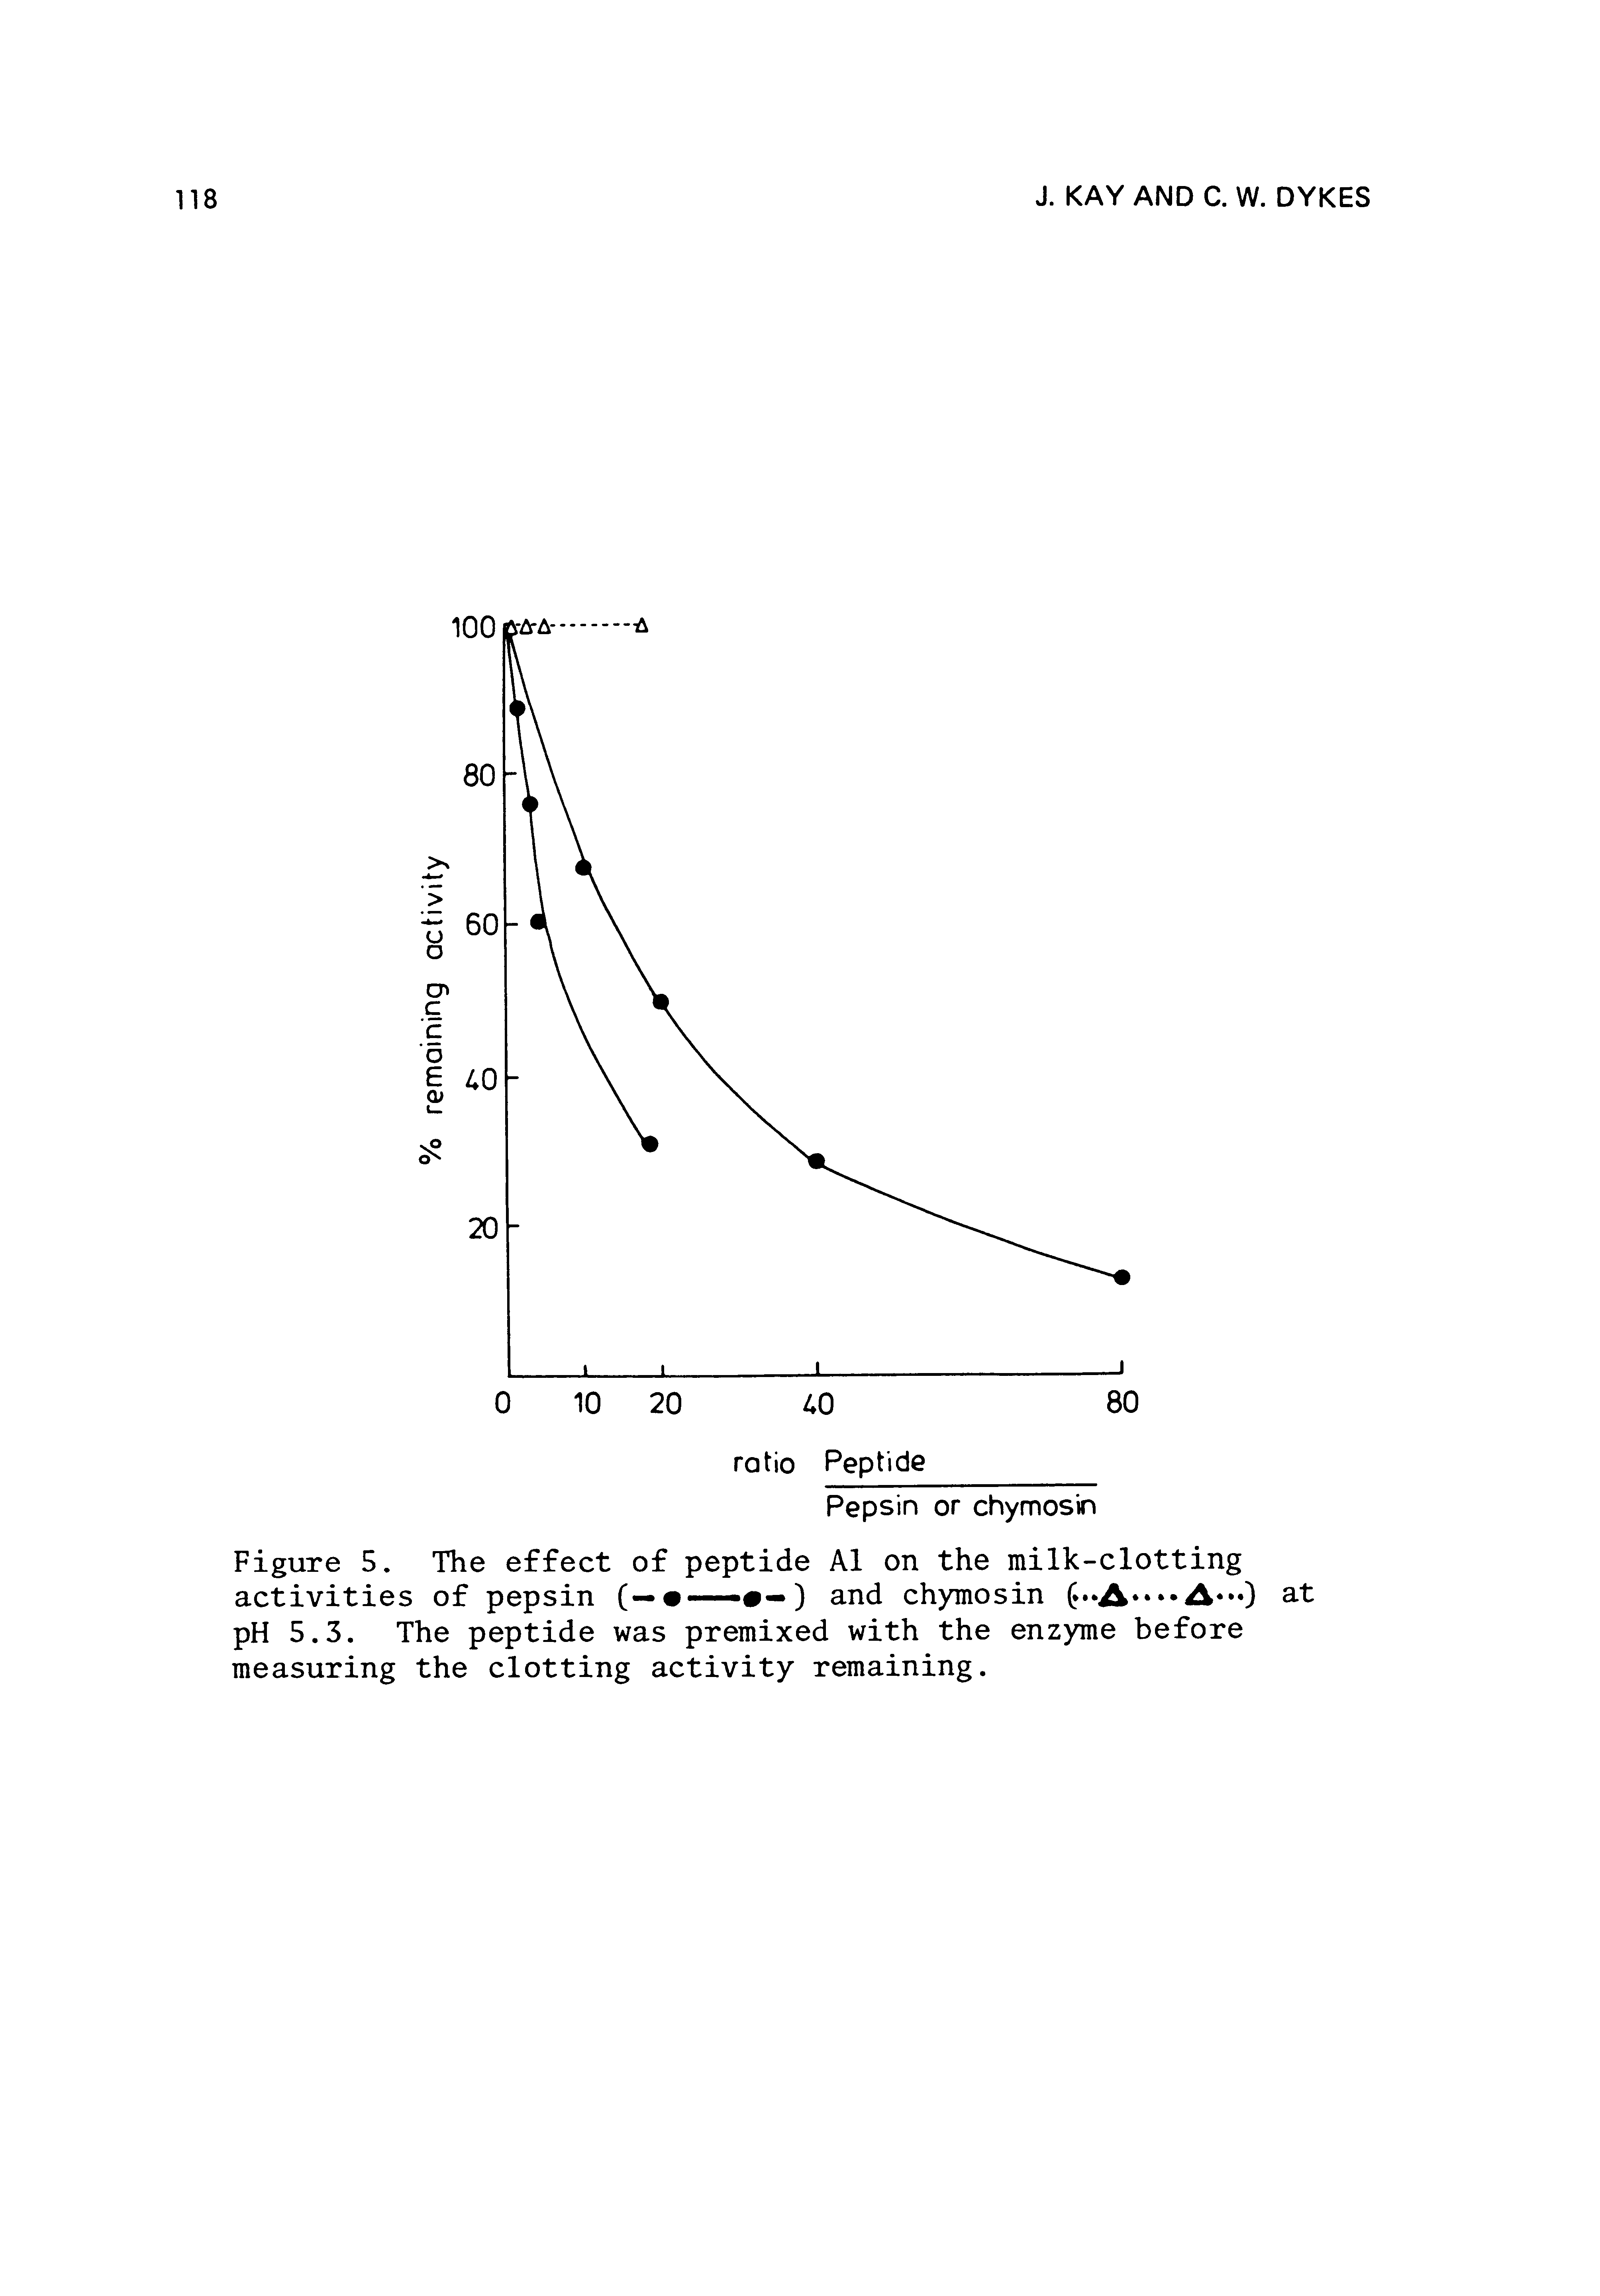 Figure 5. The effect of peptide A1 on the milk-clotting activities of pepsin (— — —) and chymosin ( A pH 5.3. The peptide was premixed with the enzyme before measuring the clotting activity remaining.